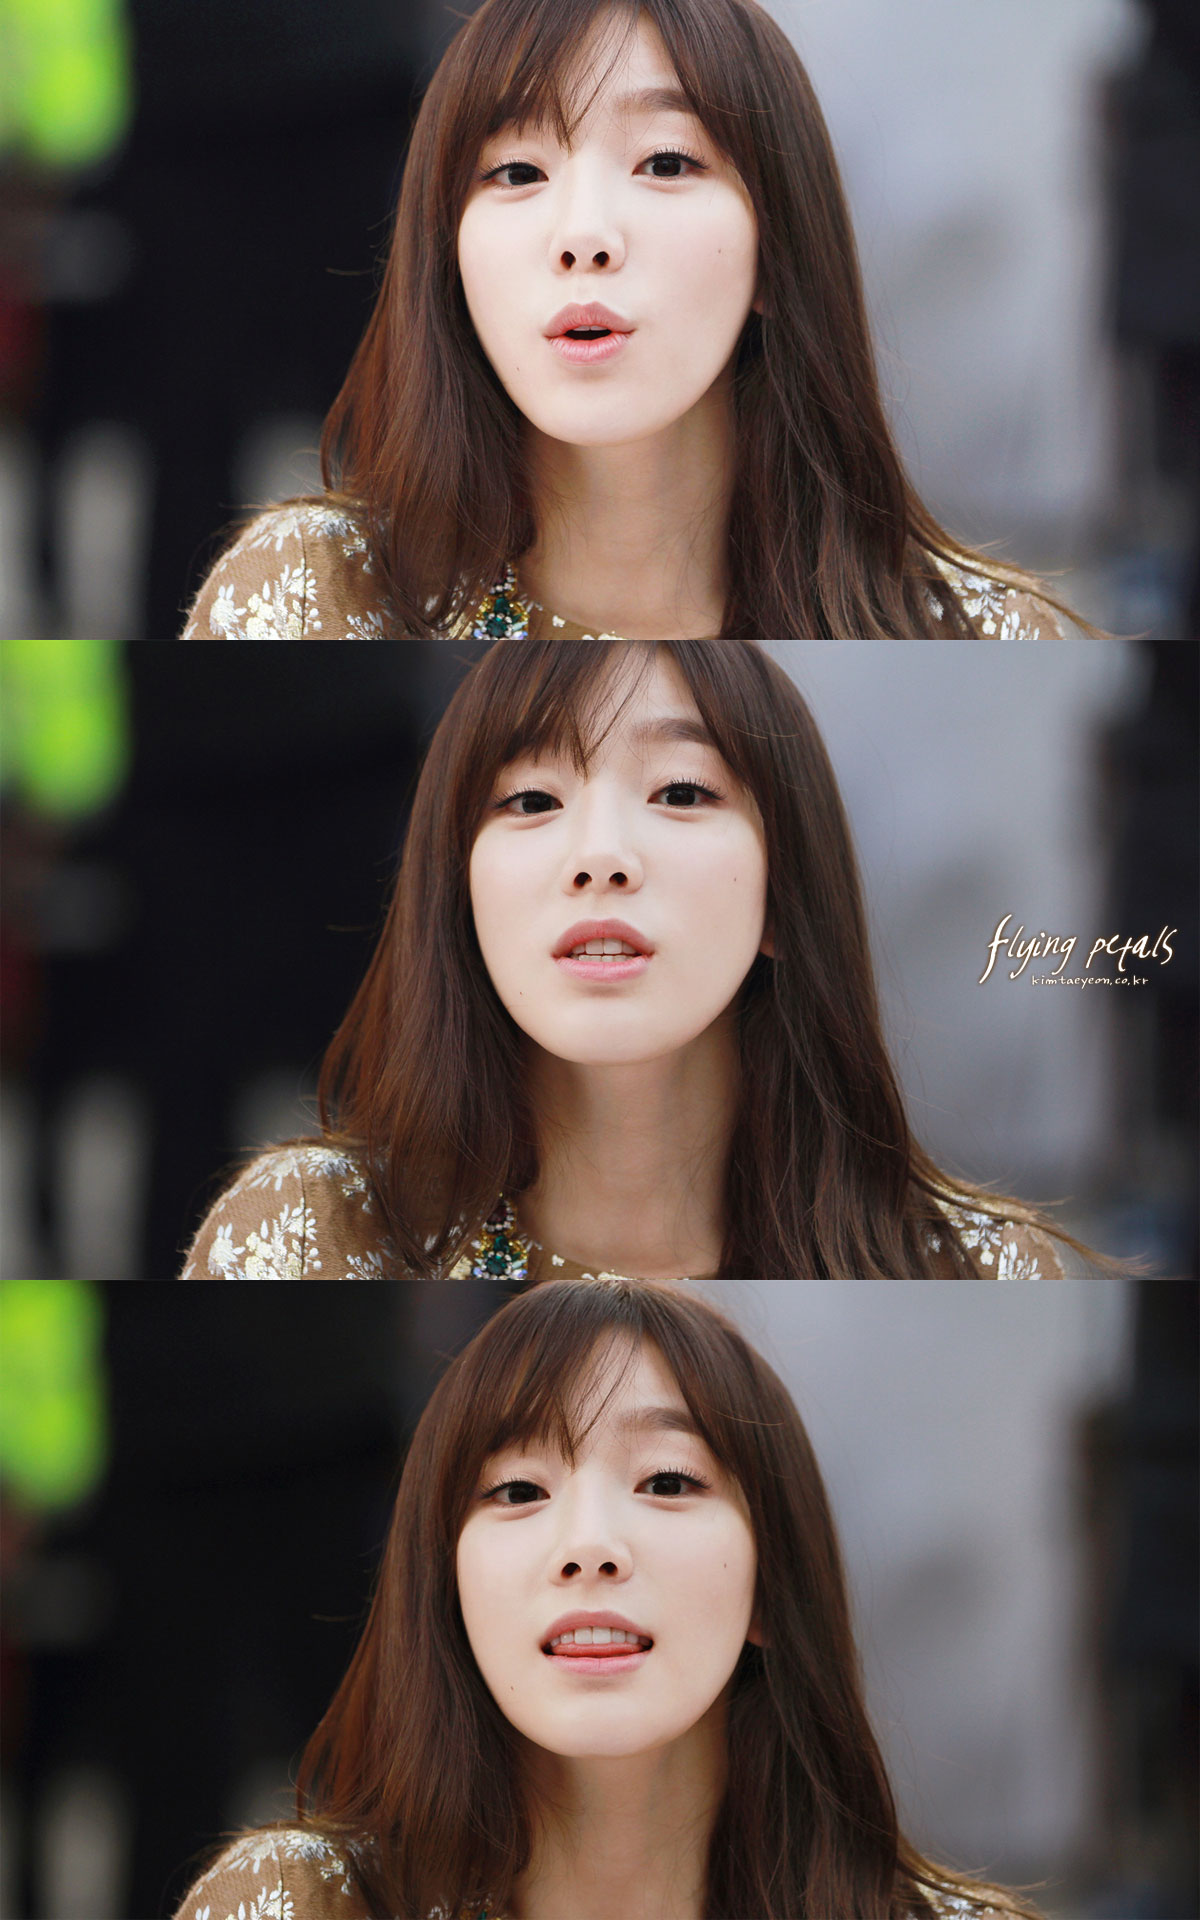 Taeyeon @ Lotte Department Store fansign